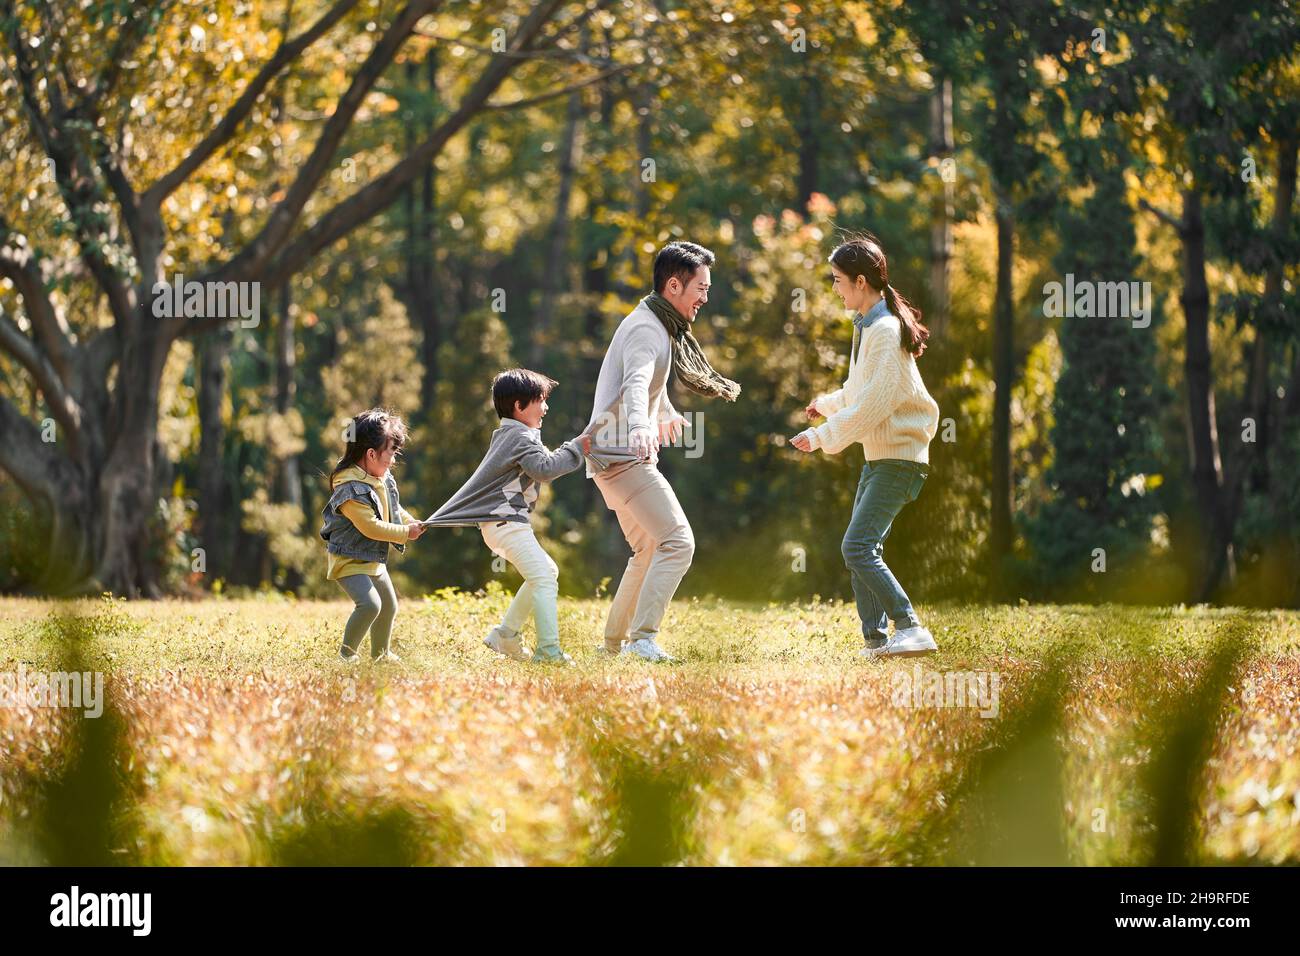 young asian family with two children having fun playing game outdoors in park Stock Photo